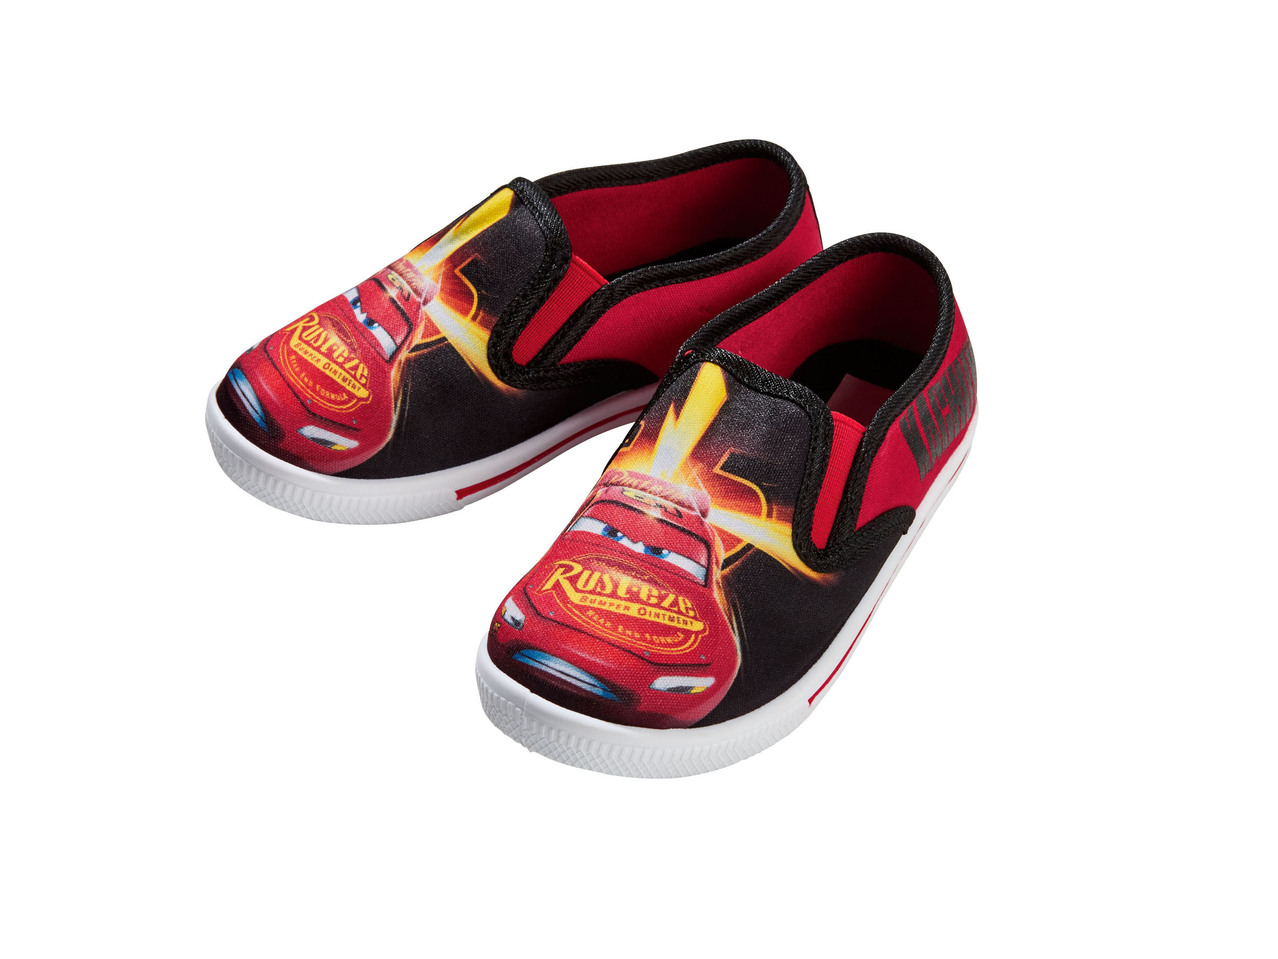 Boys' Casual Shoes - "Cars, Spiderman, Paw Patrol"